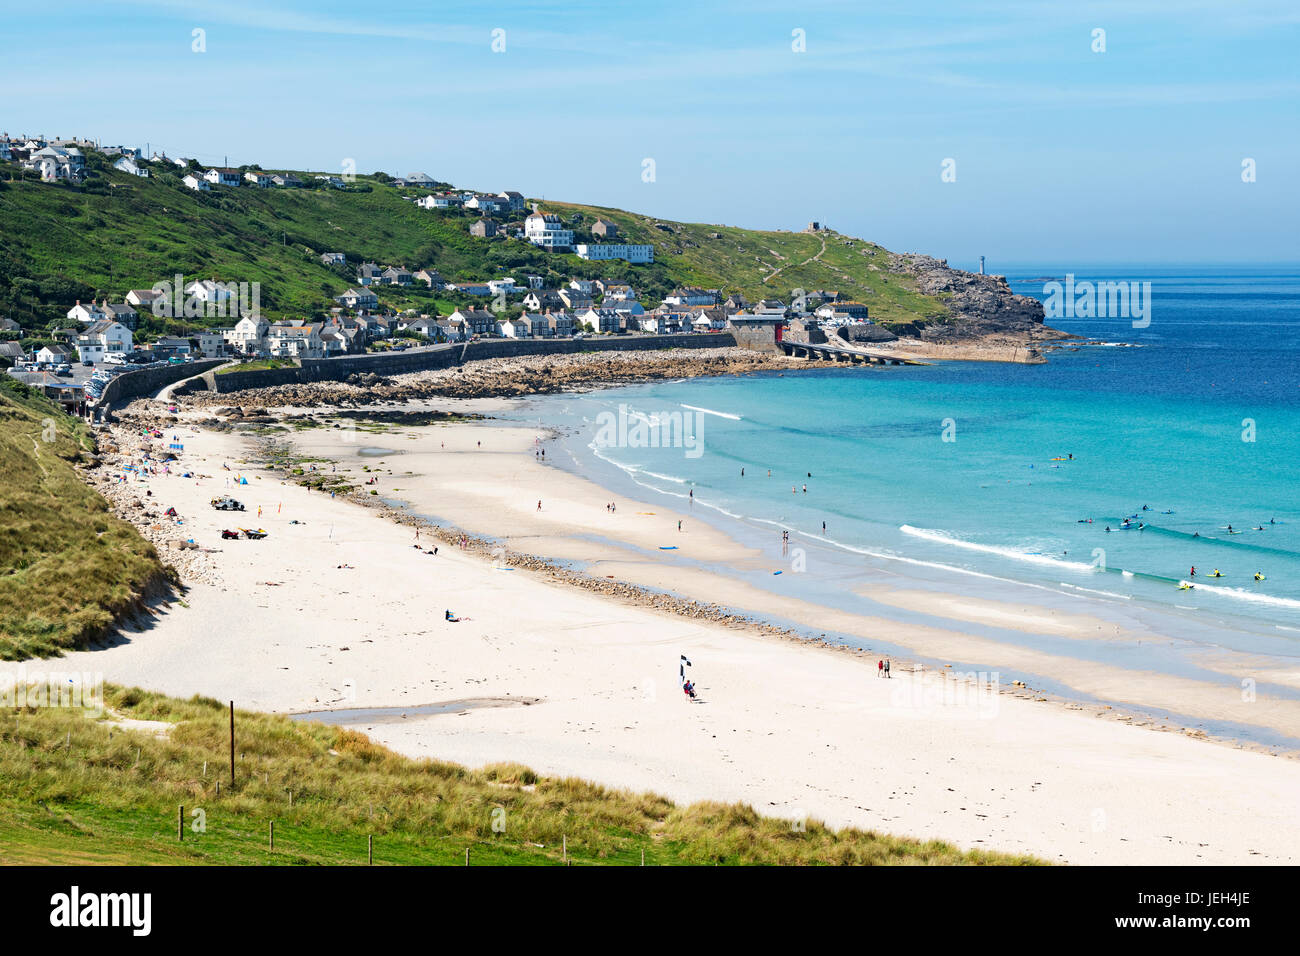 the white sandy beach and blue water at sennen cove near lands end in cornwall, england, britain, uk. Stock Photo